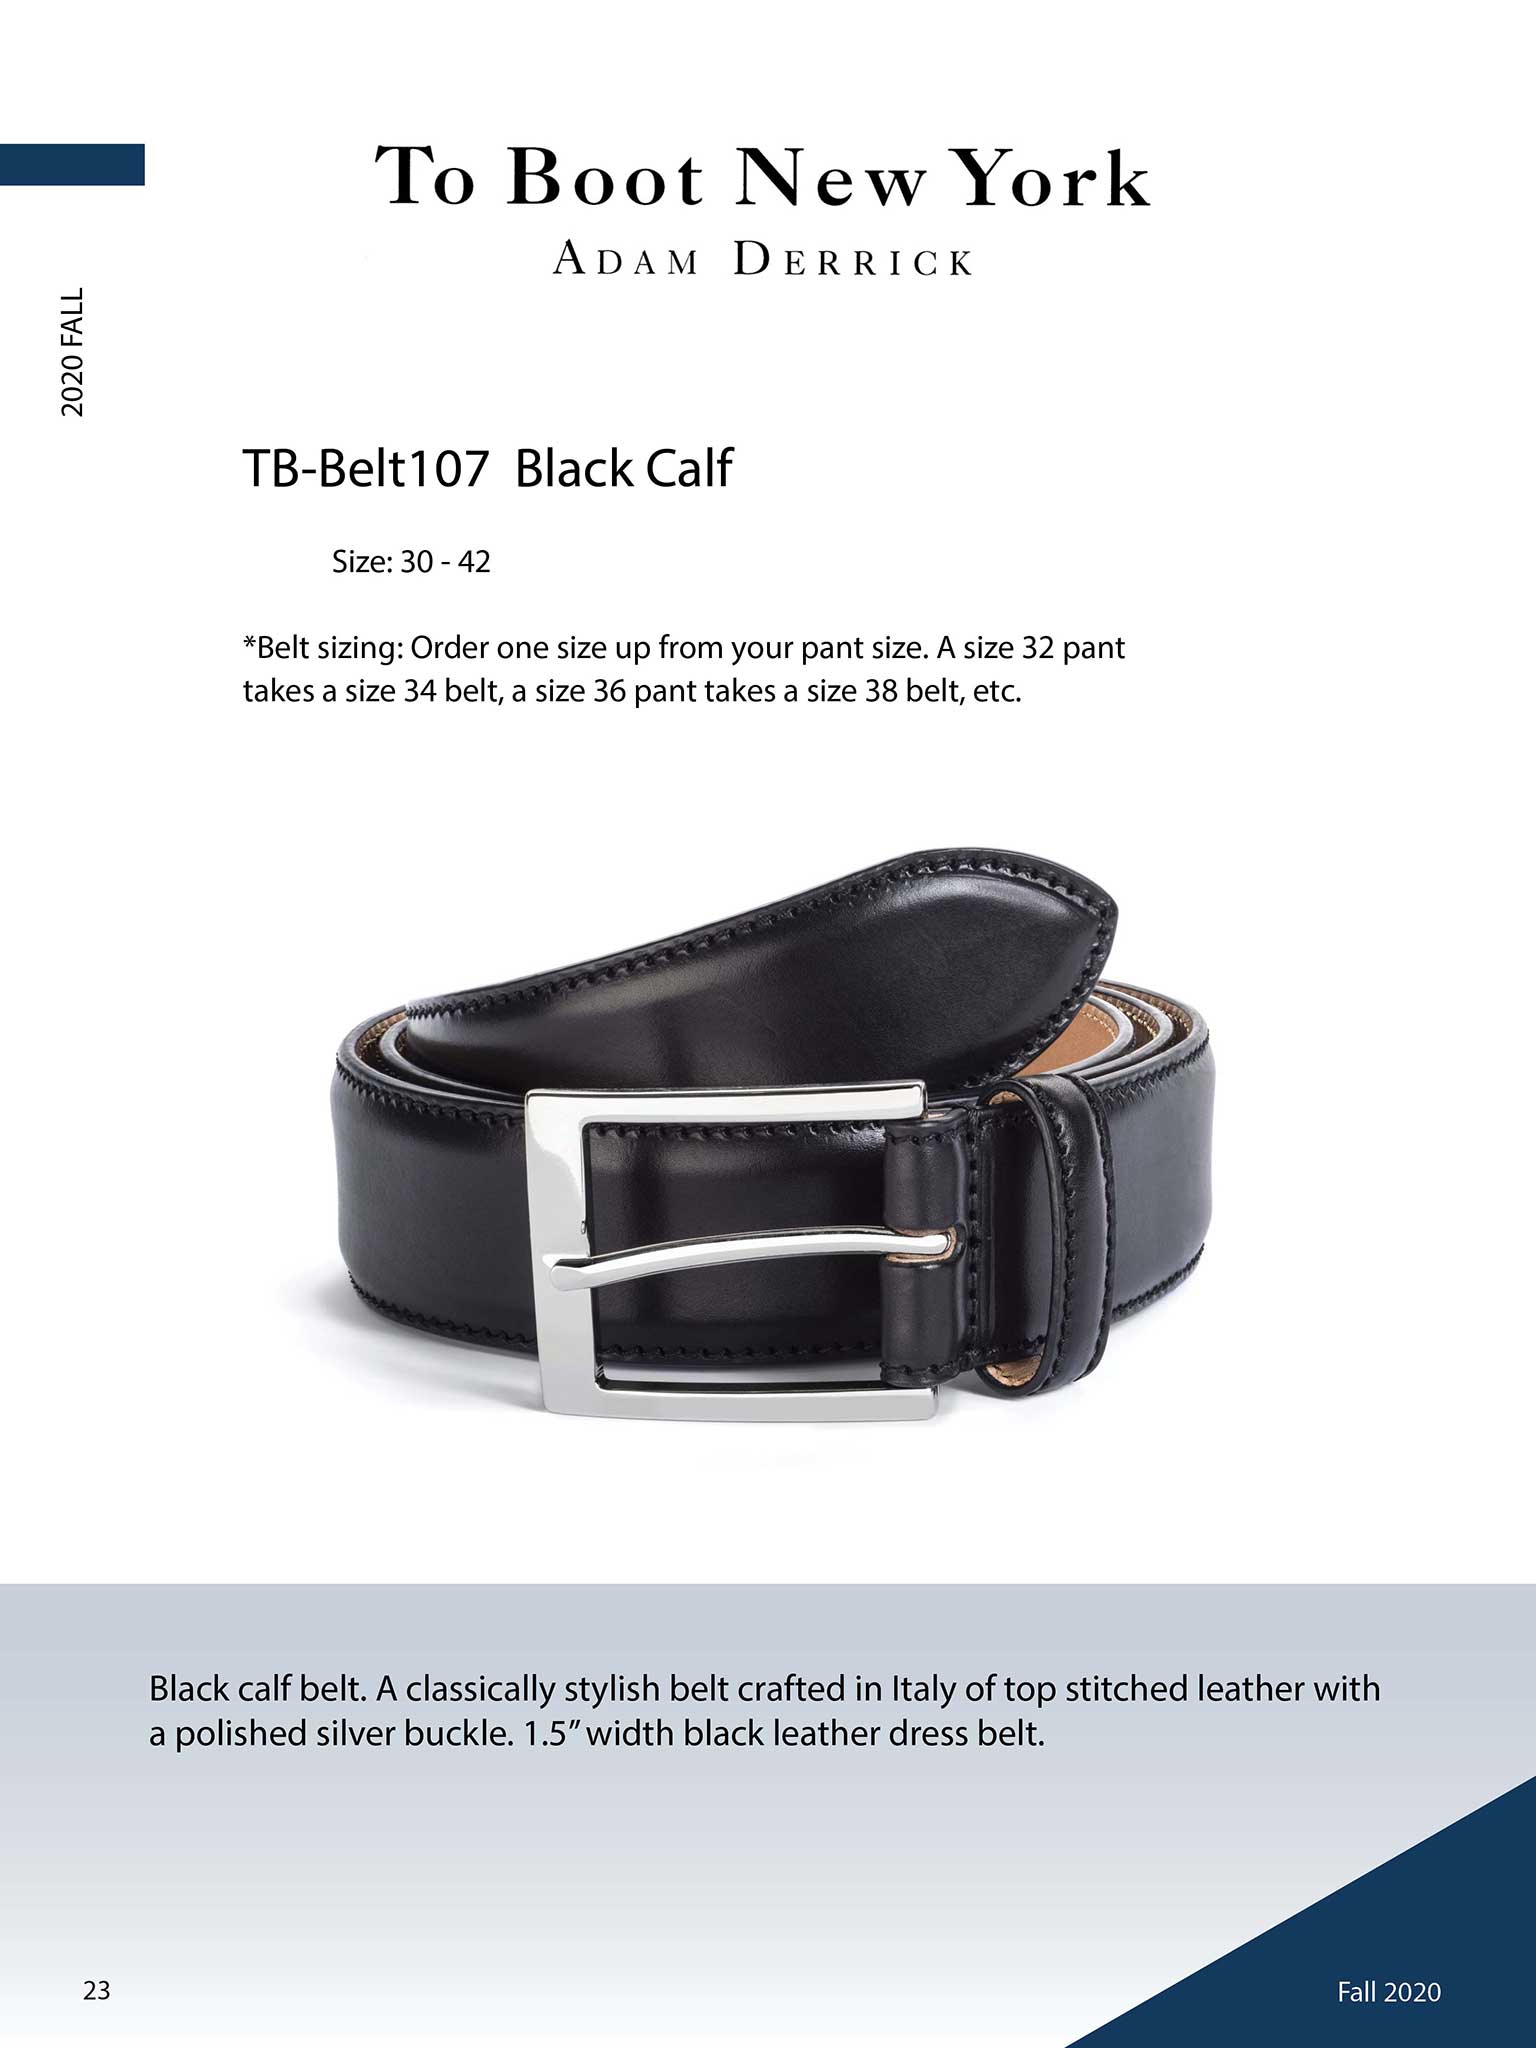 Black Calf Belt by To Boot New York